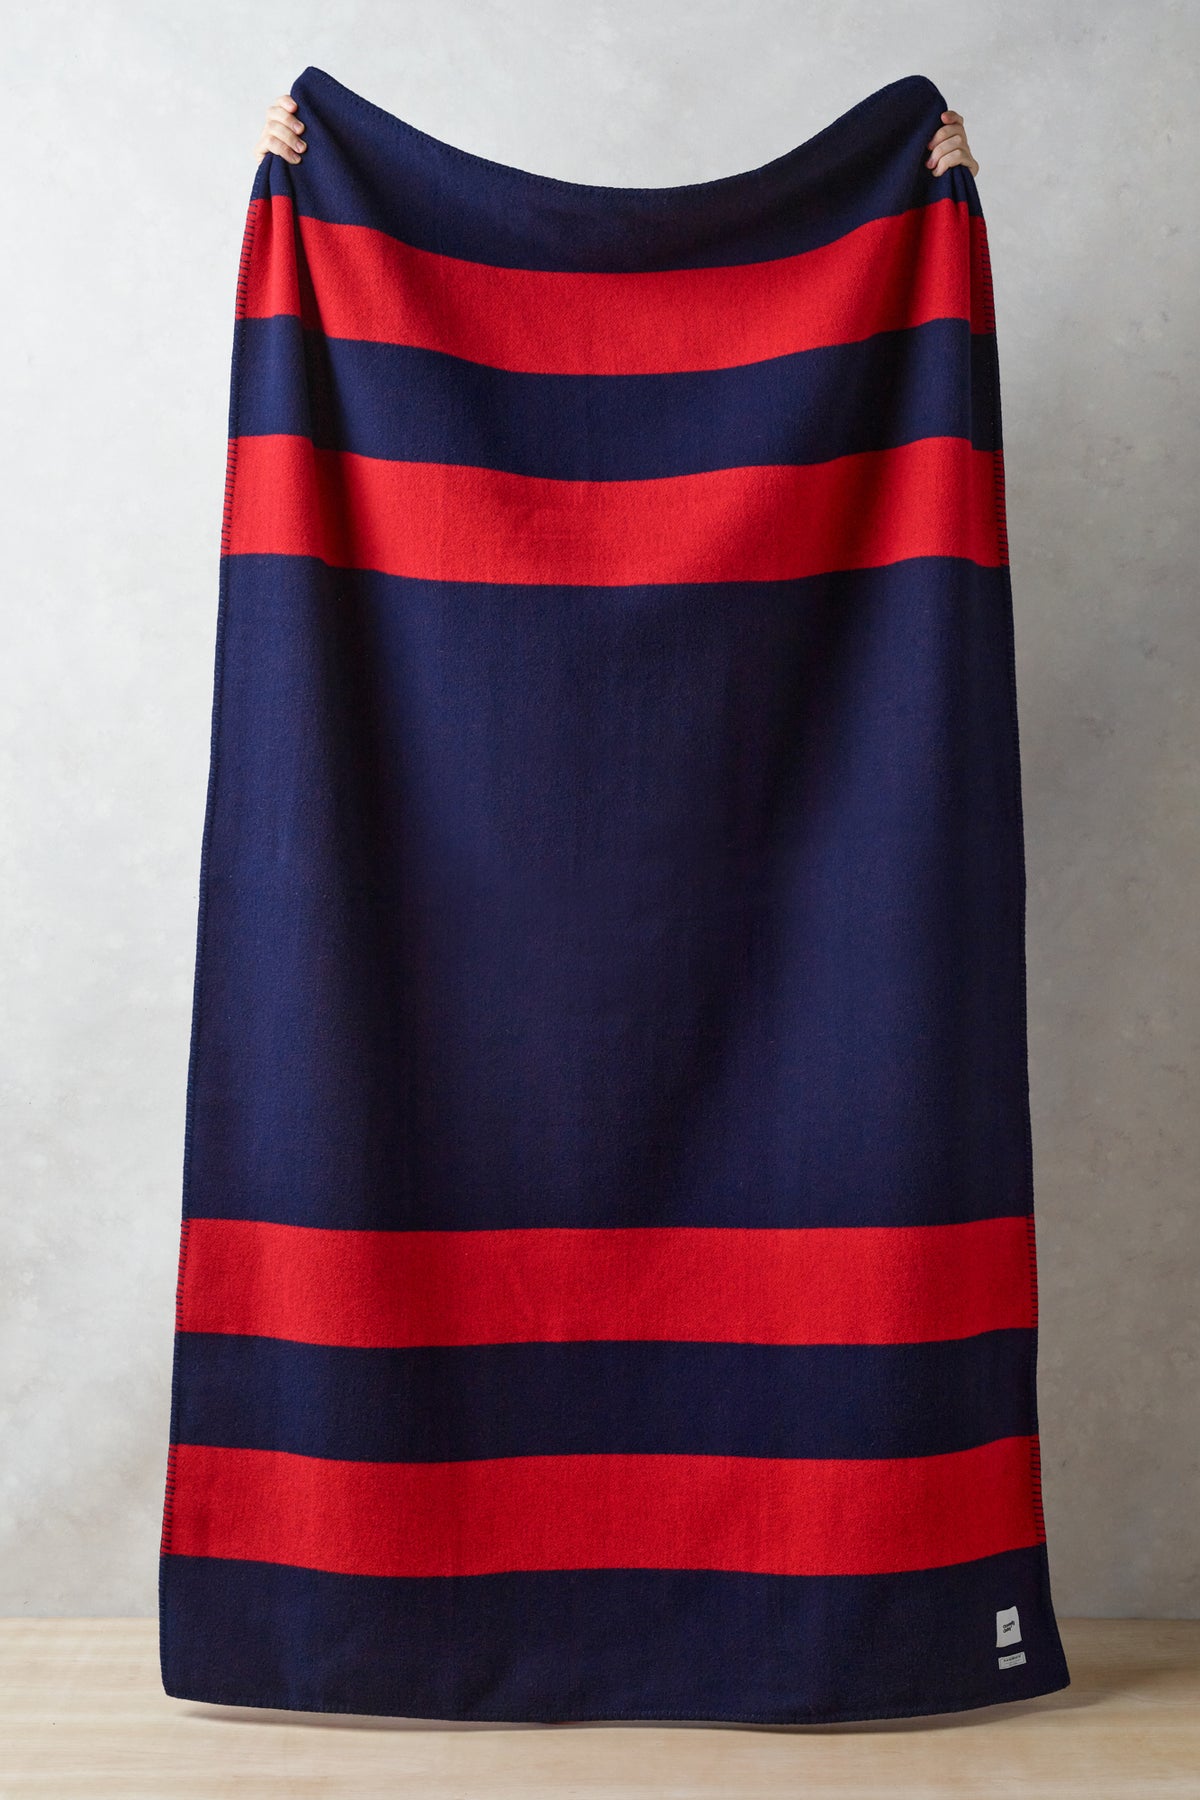 
            Image showing full length of navy and red striped pure merino wool blanket